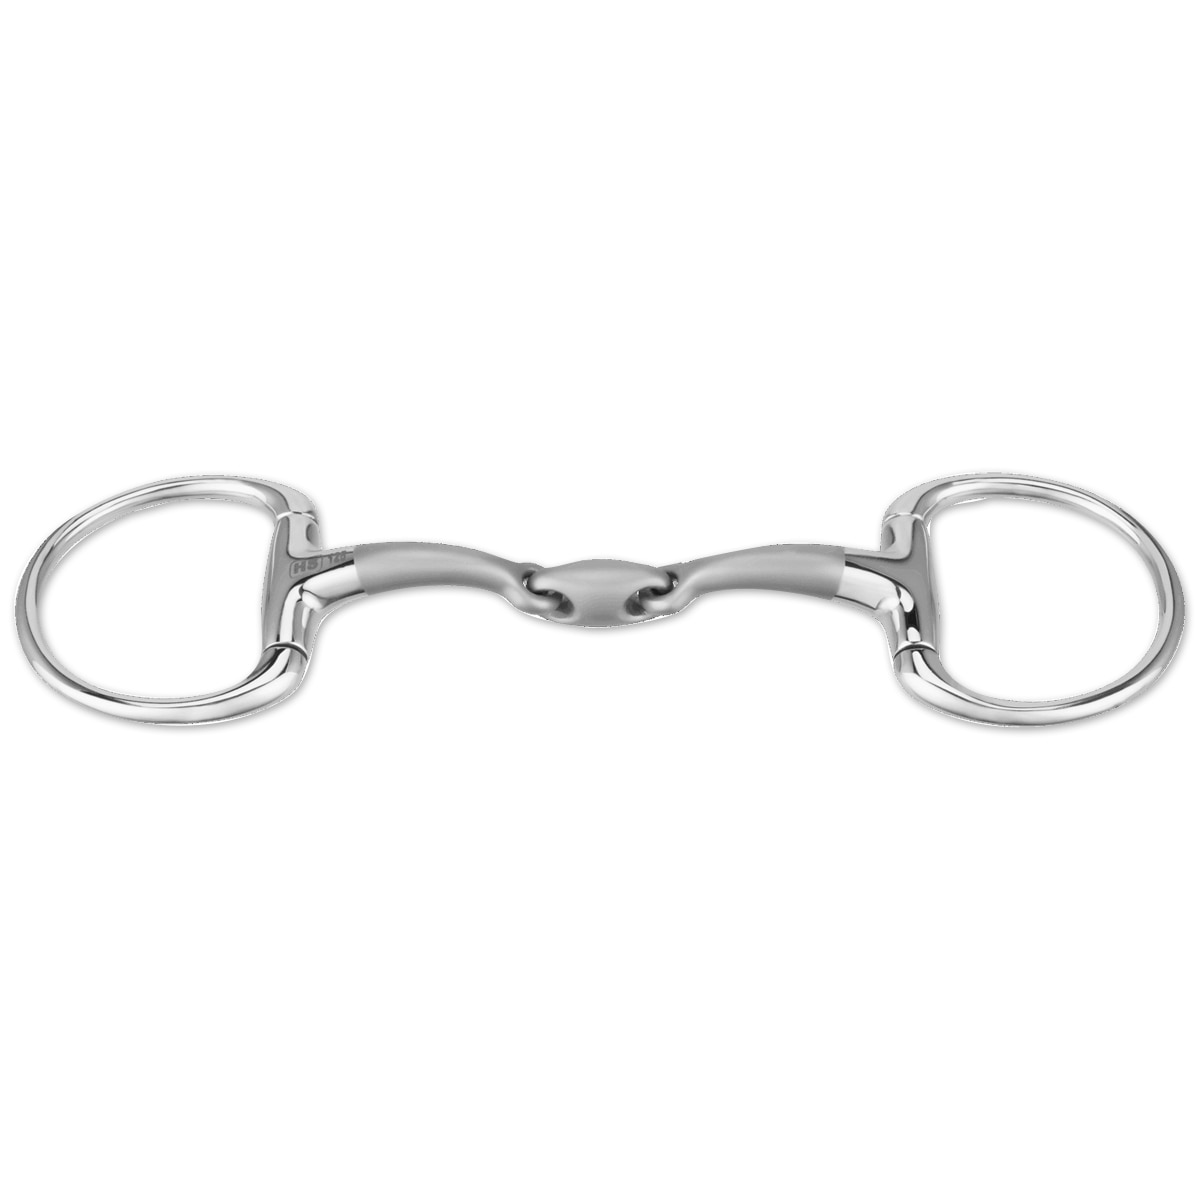 Nathe D-Ring snaffle 18 mm double jointed | Sprenger